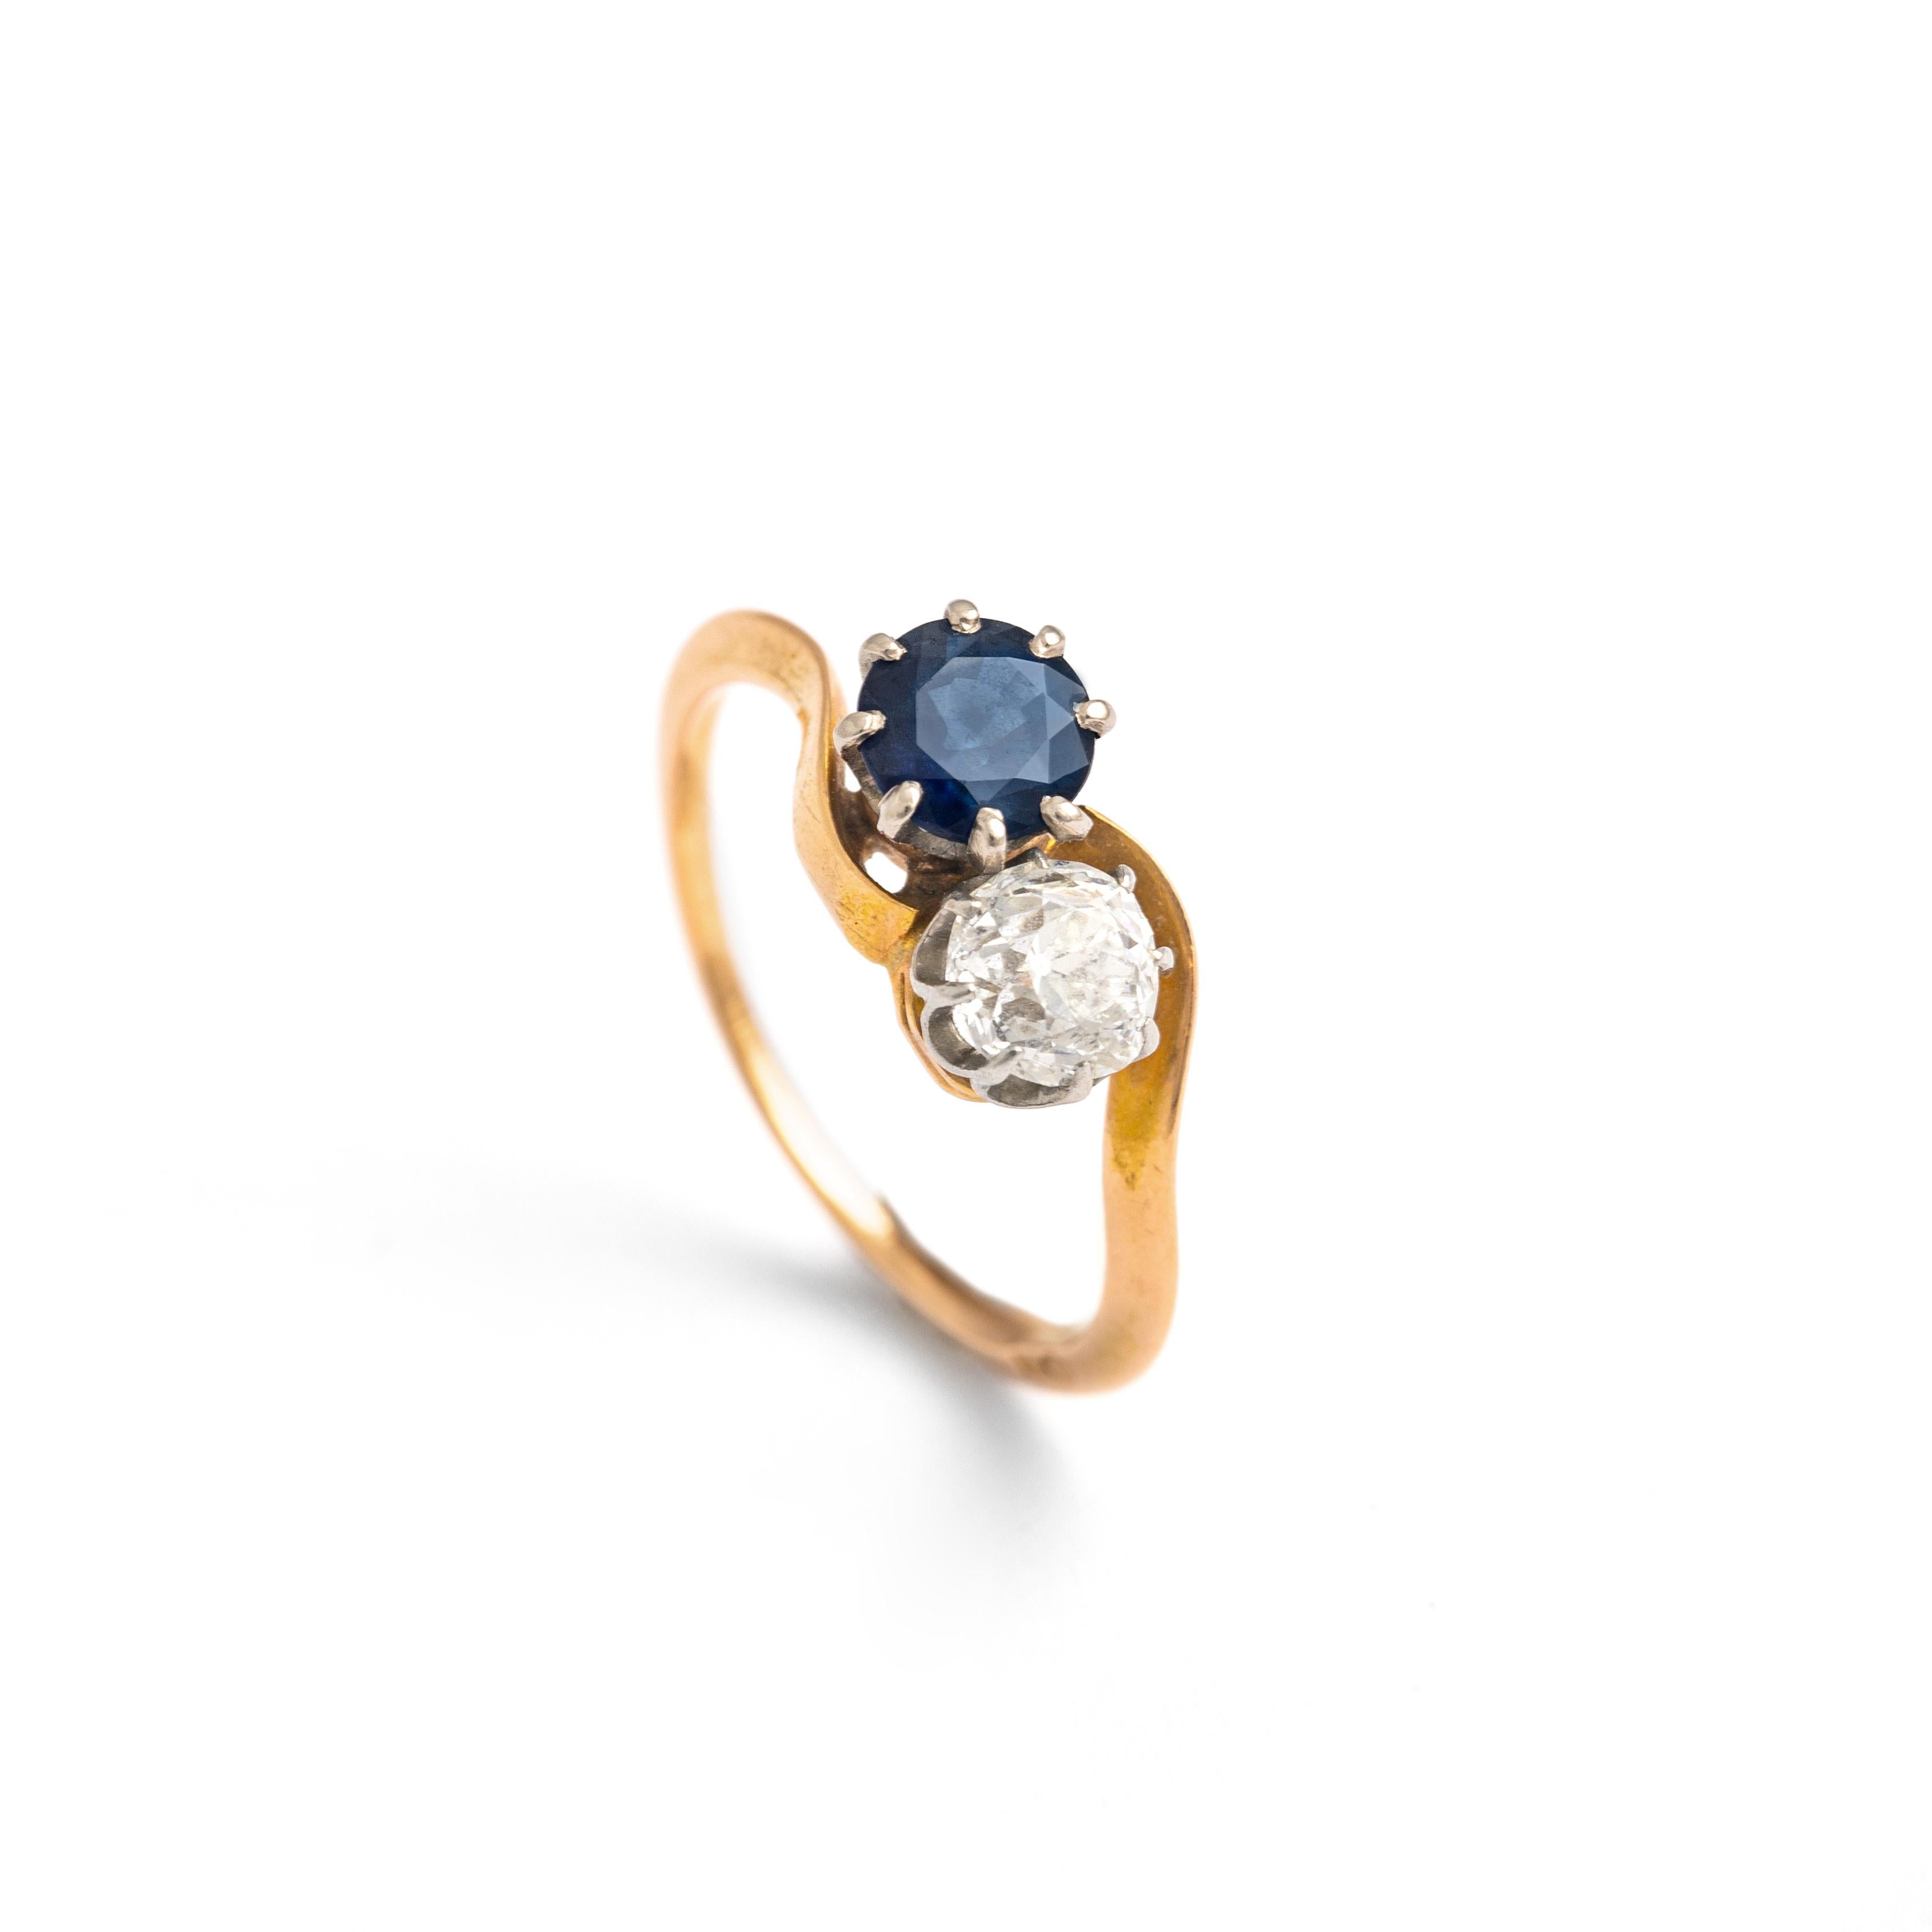 Crossover Old mine cut Diamond and round cut Sapphire approximately 0.50 carat each on platinum and 18K gold ring.
Size: 51.5 / 5.75 US.
French assay marks.
Early 20th Century.